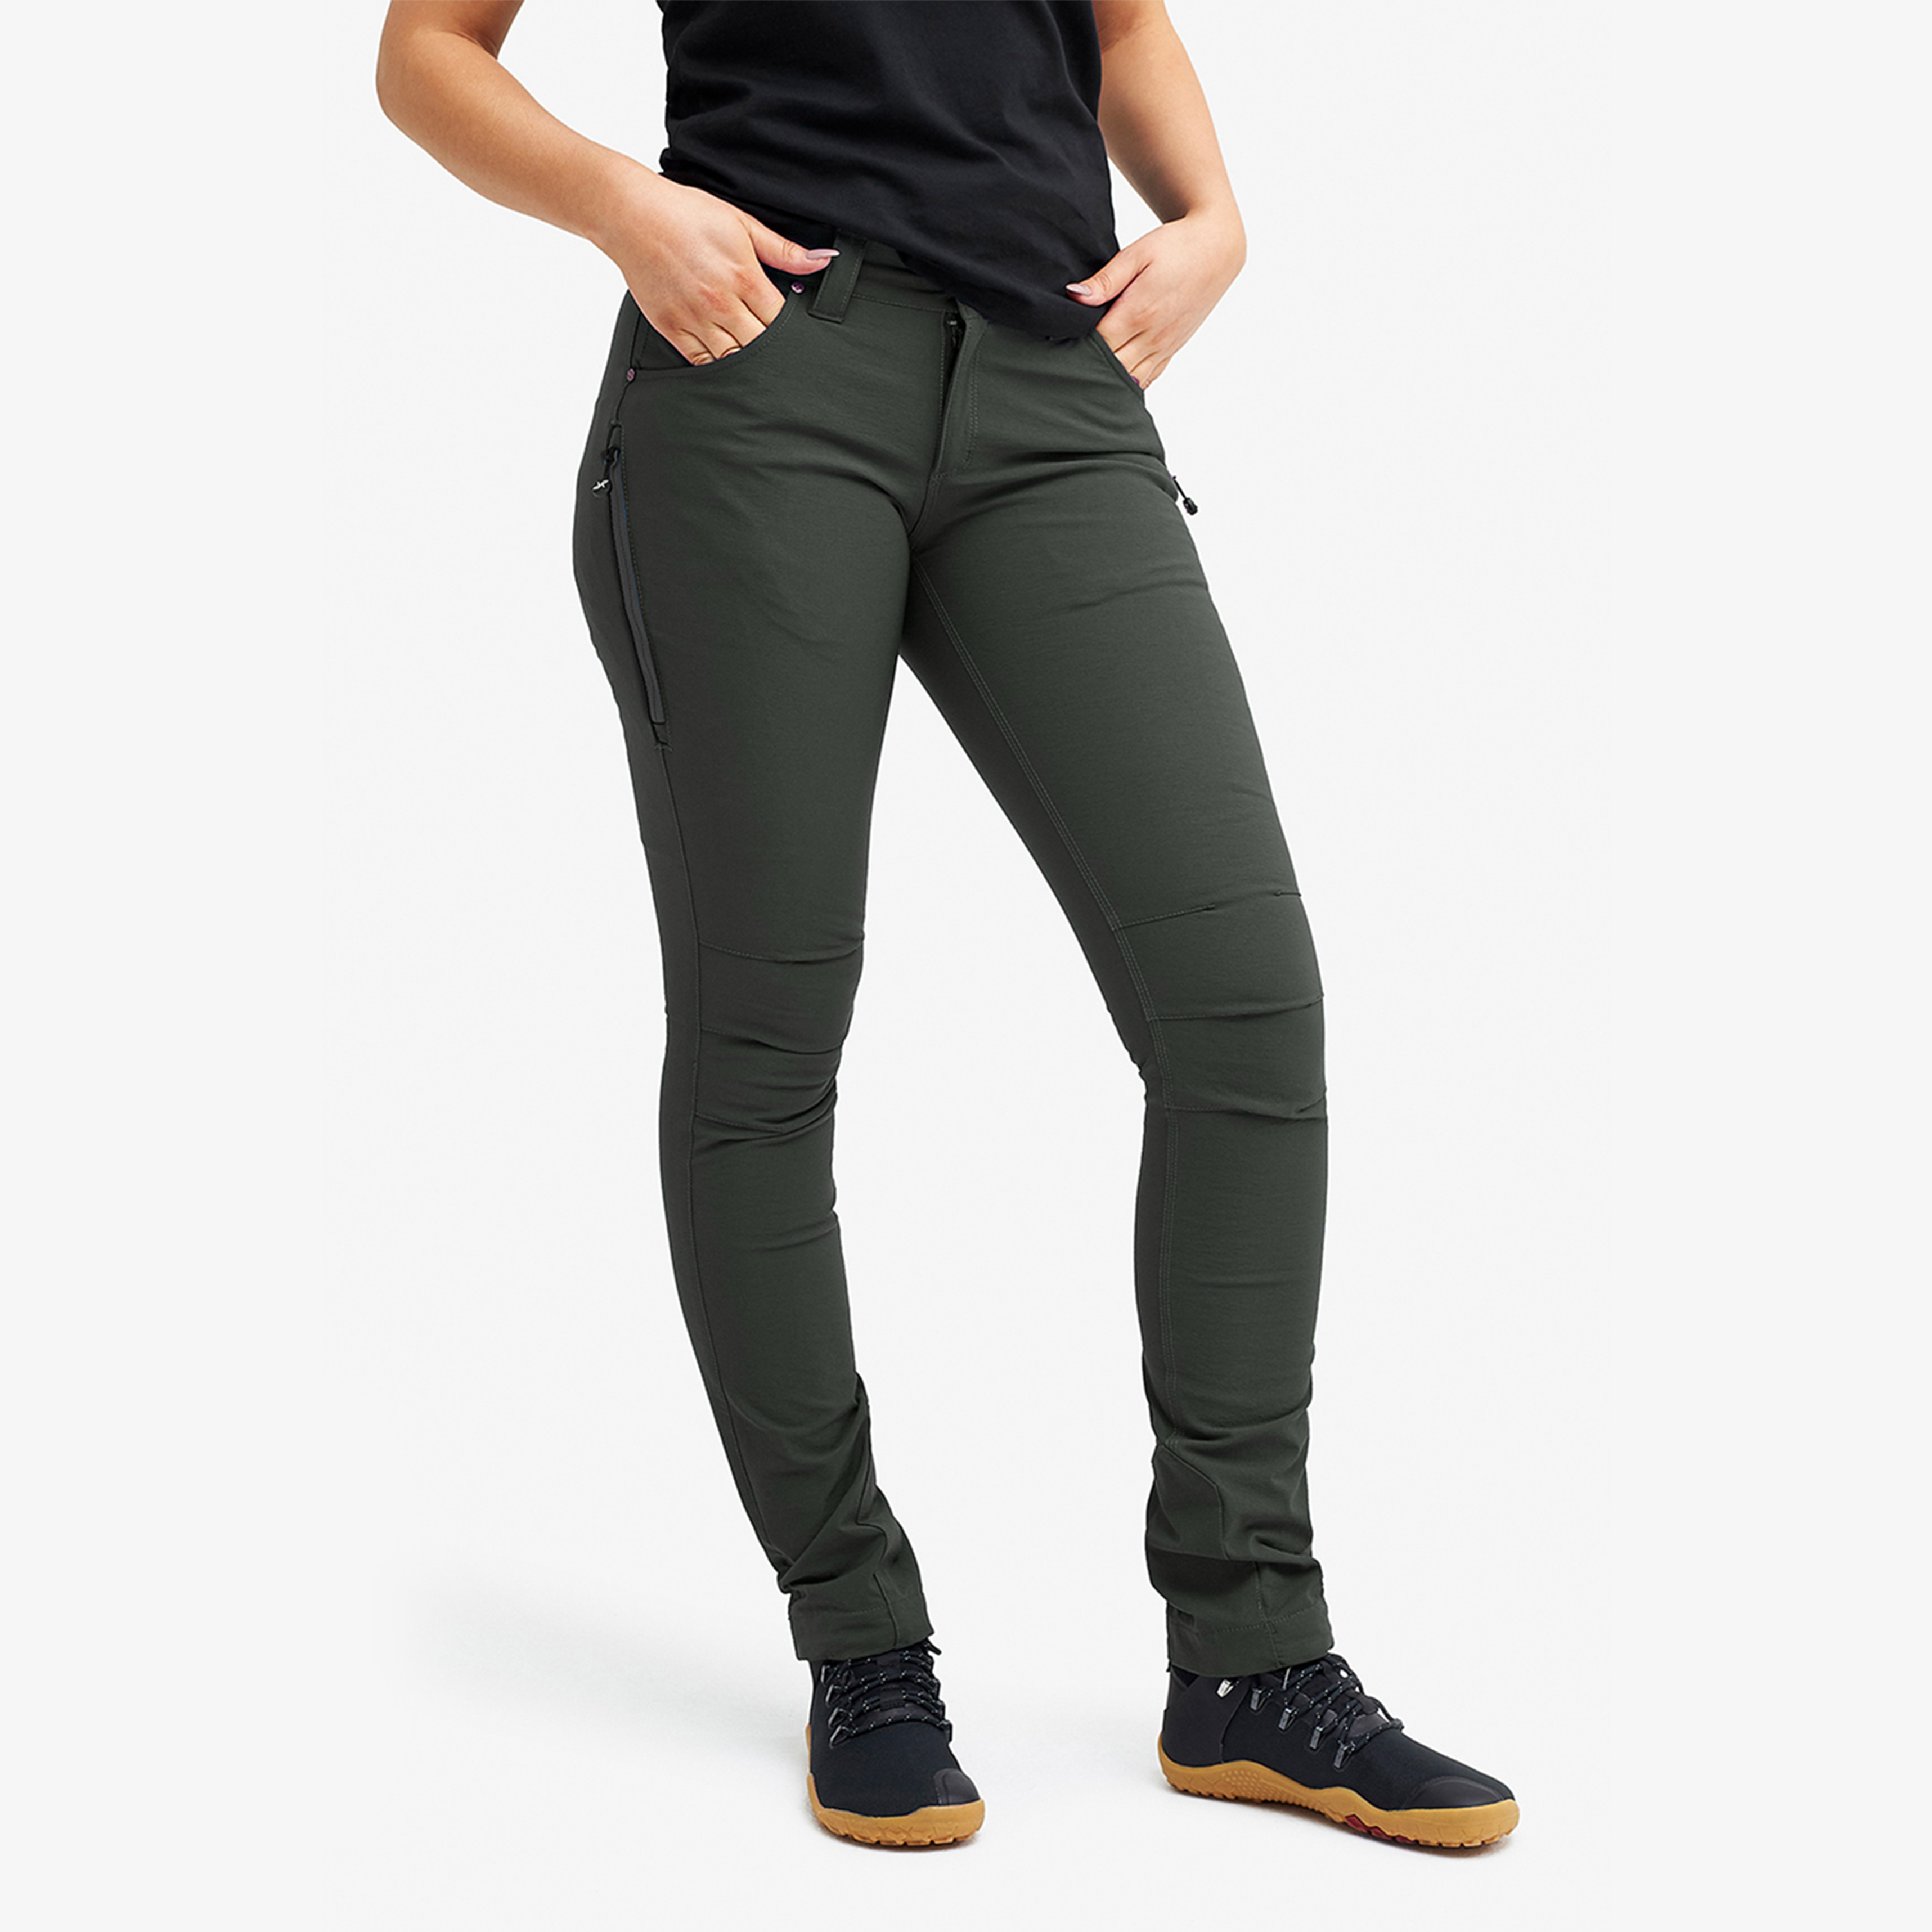 Adrenaline Outdoor Jeans Pirate Black Dame